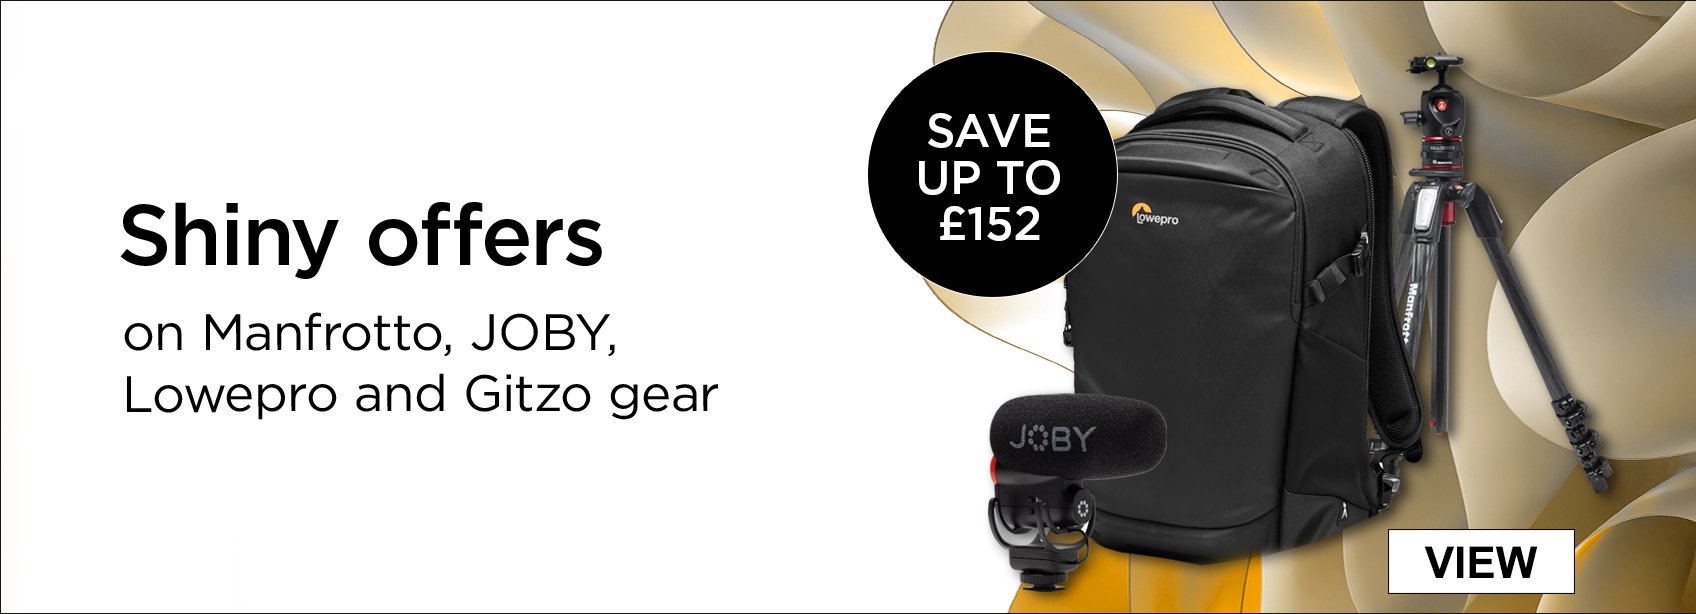 Shiny offers on Manfrotto, JOBY, Lowepro and Gitzo gear